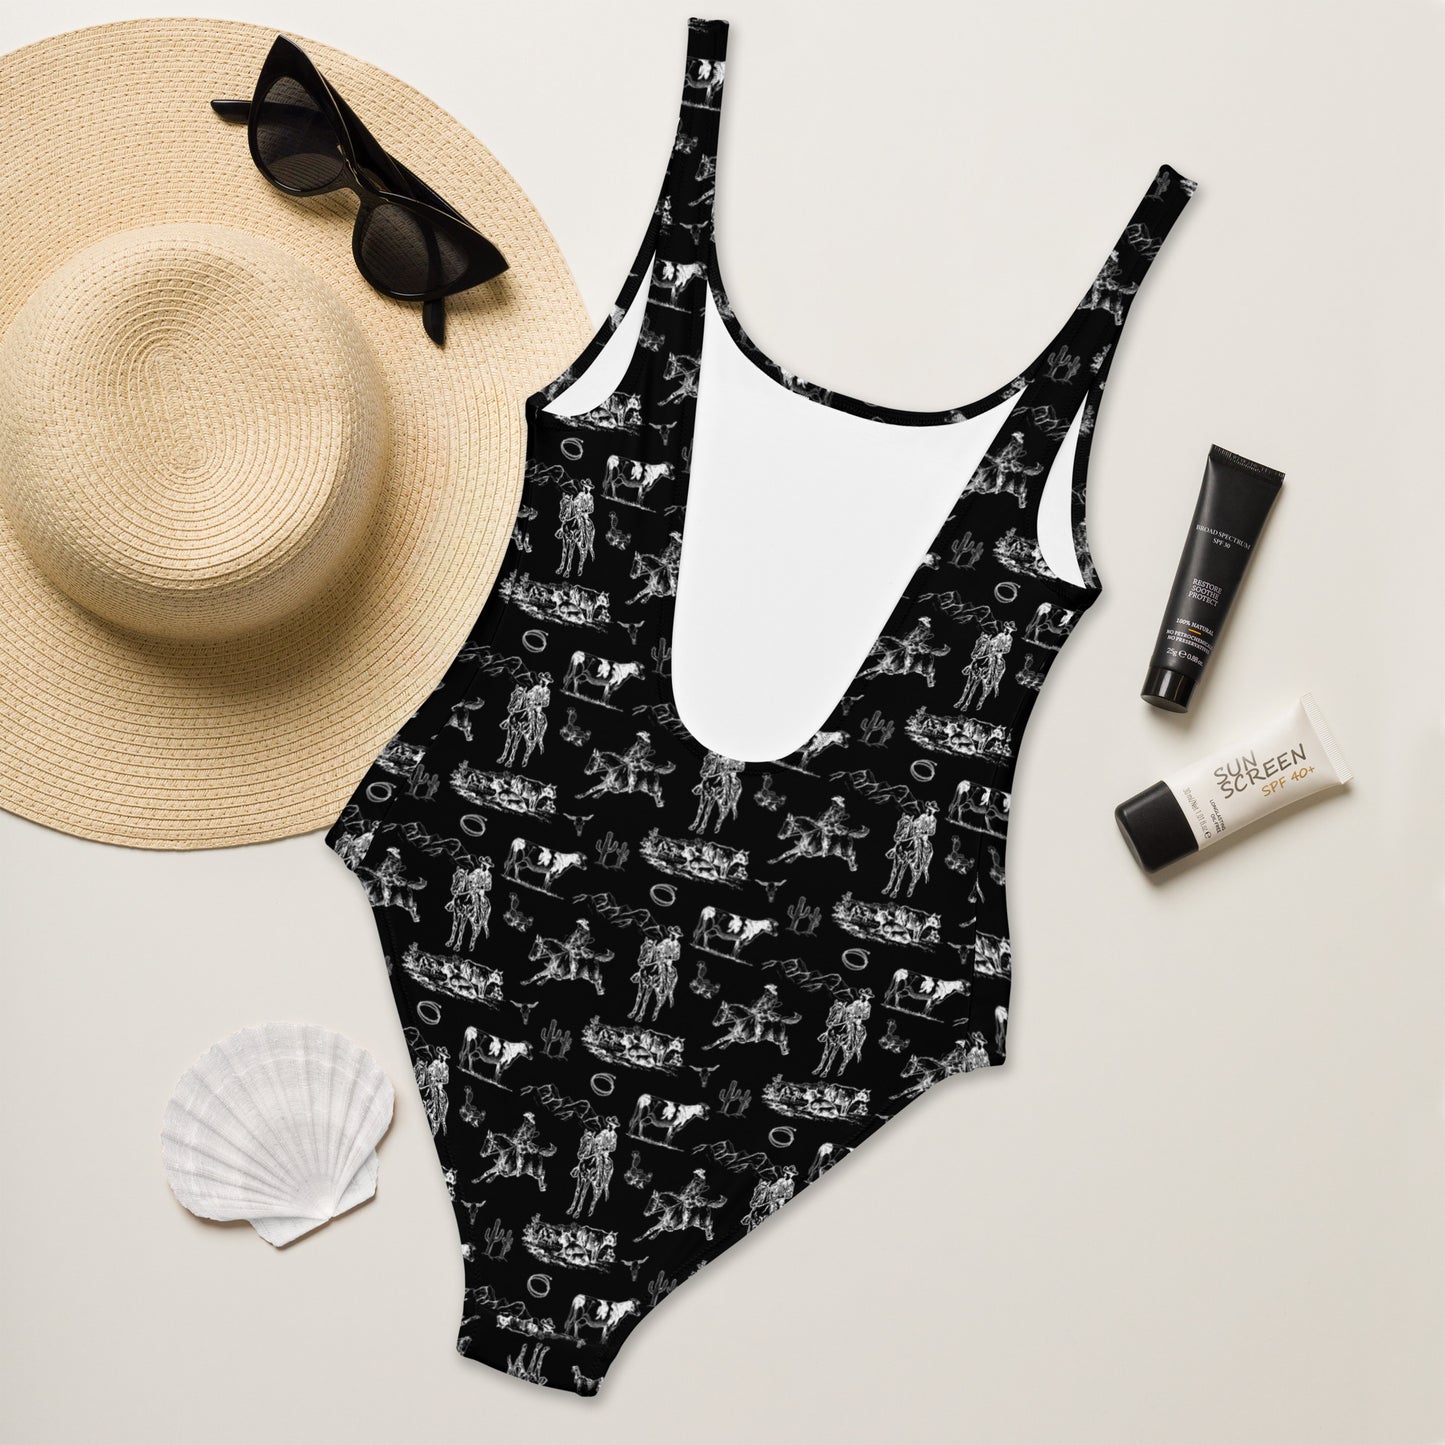 Yeehaw Ranch Way One-Piece Swimsuit